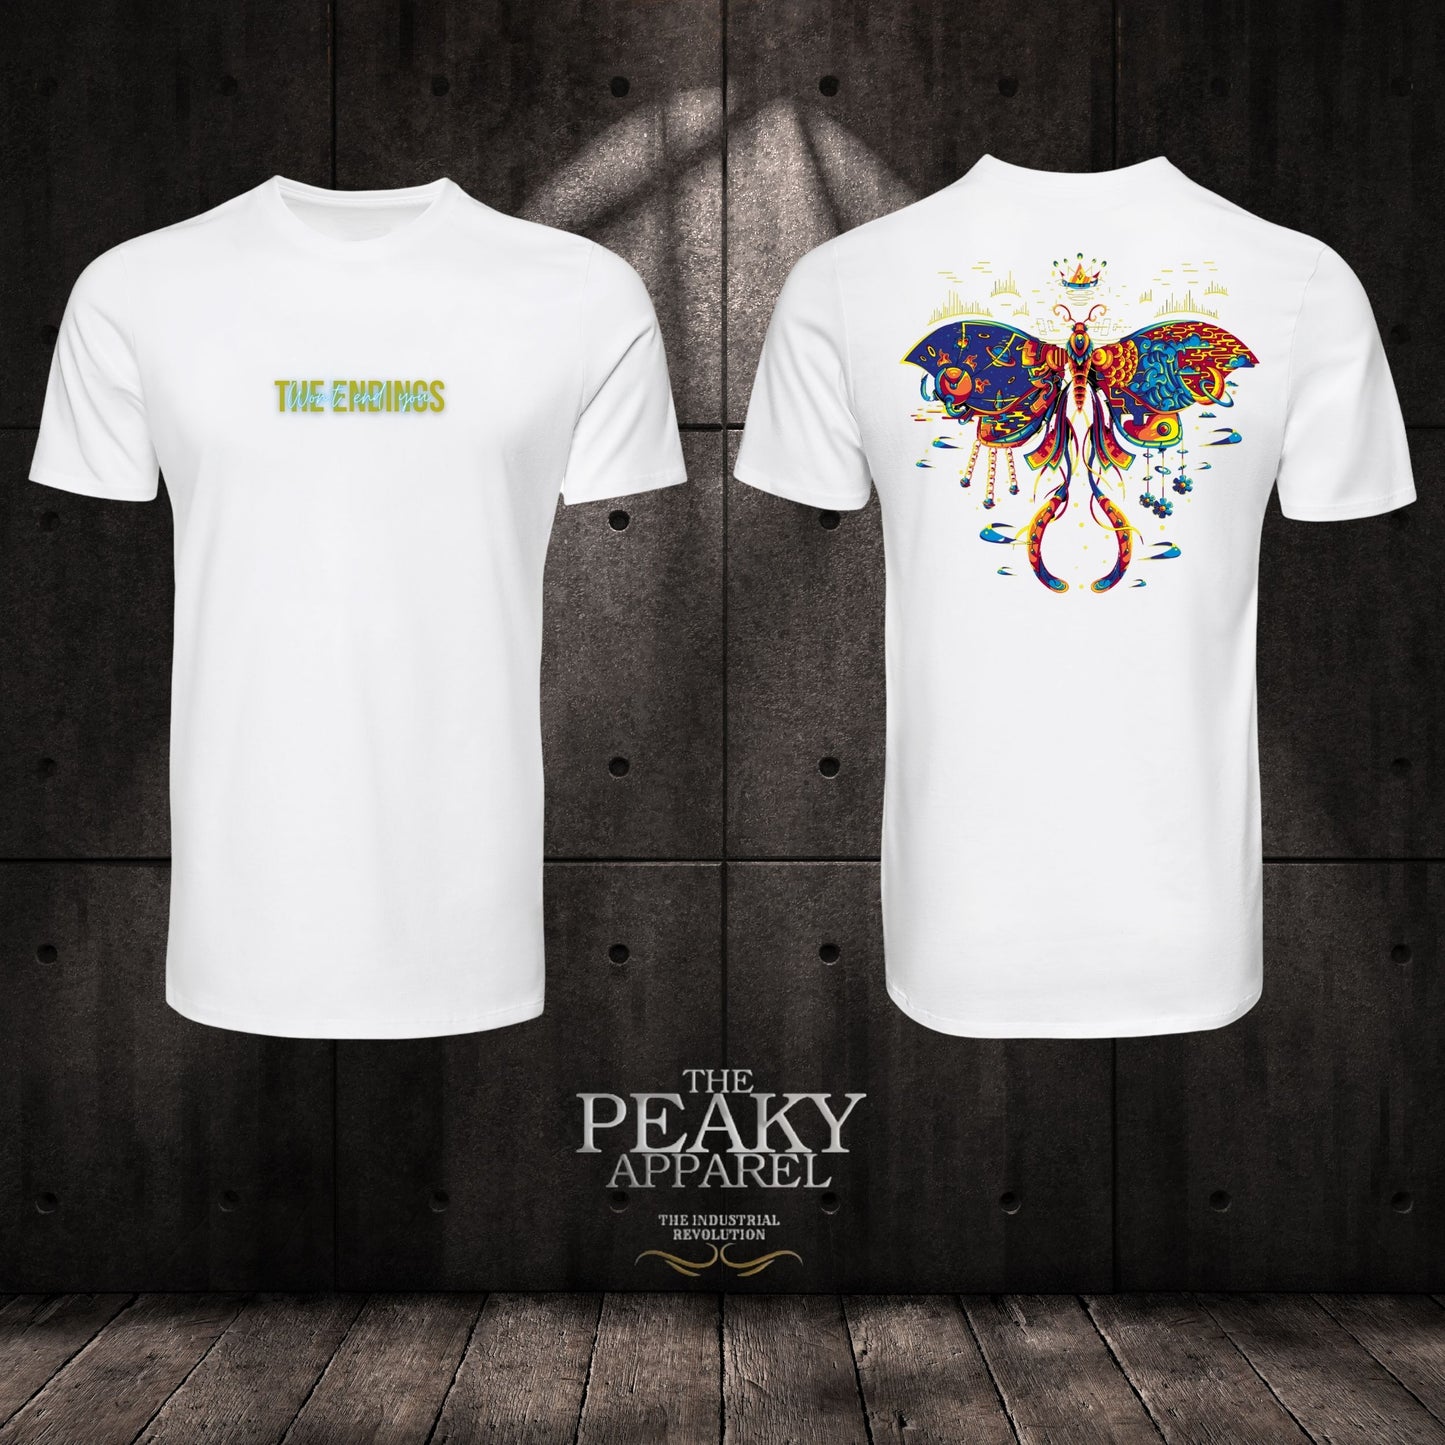 Geometric Butterfly Design DTF Casual T-Shirt Peaky Apparel Design Mens Trending Cool